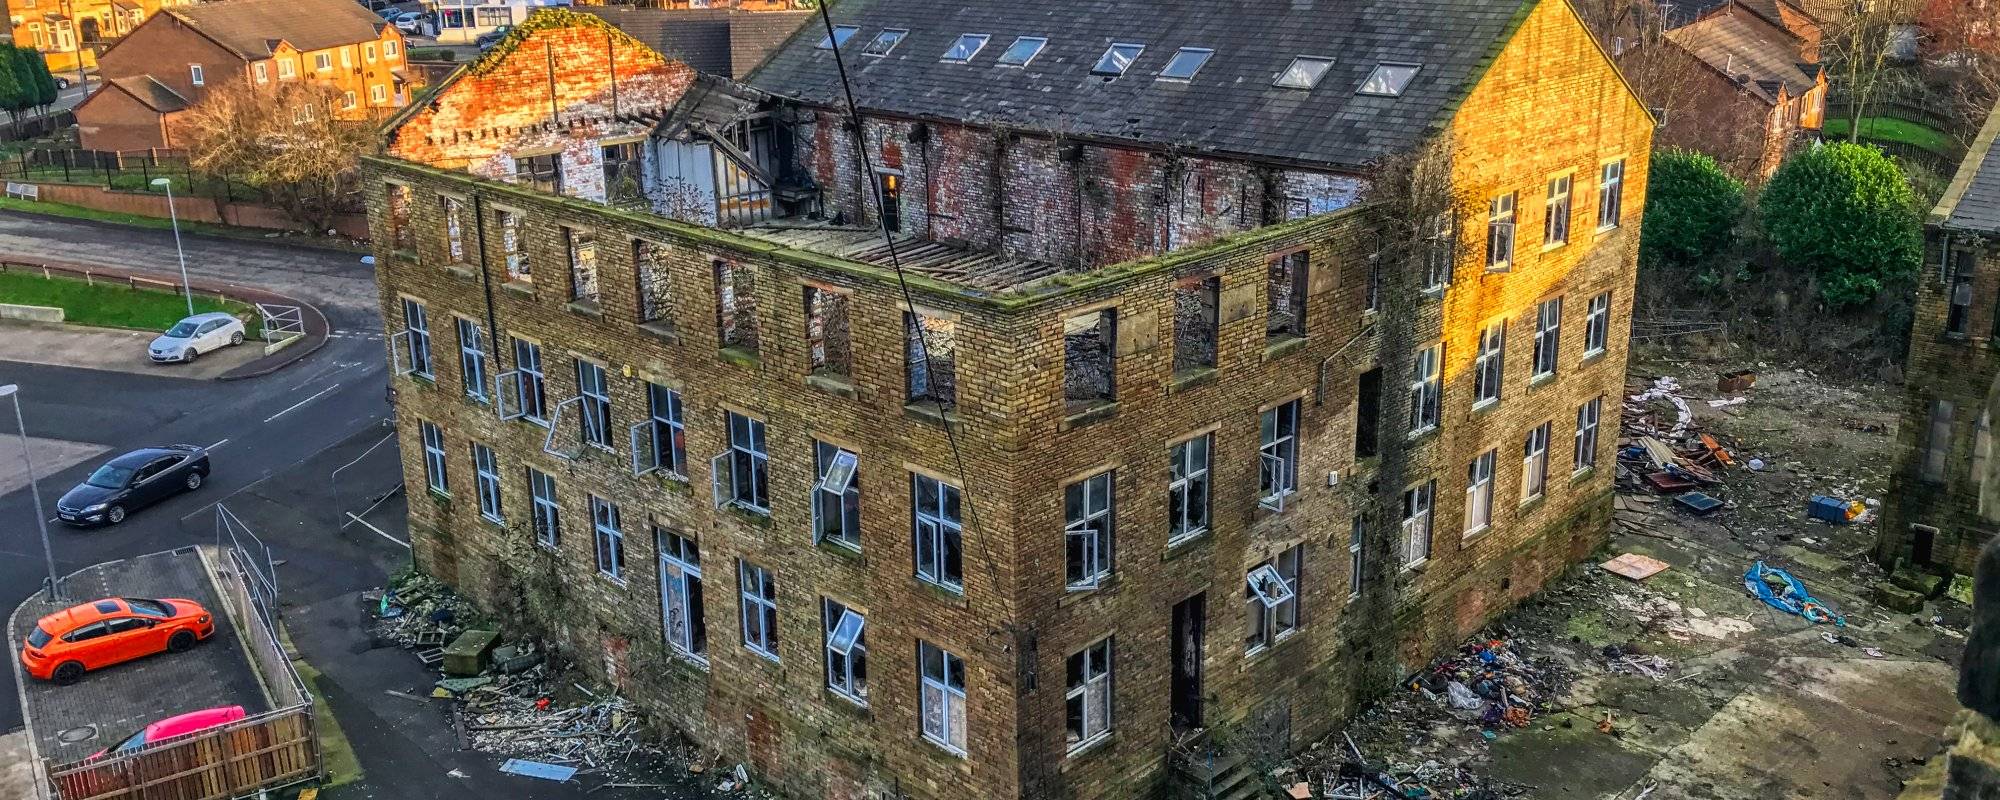 Tales of the Urban Explorer: Barkerend Mills Part Two